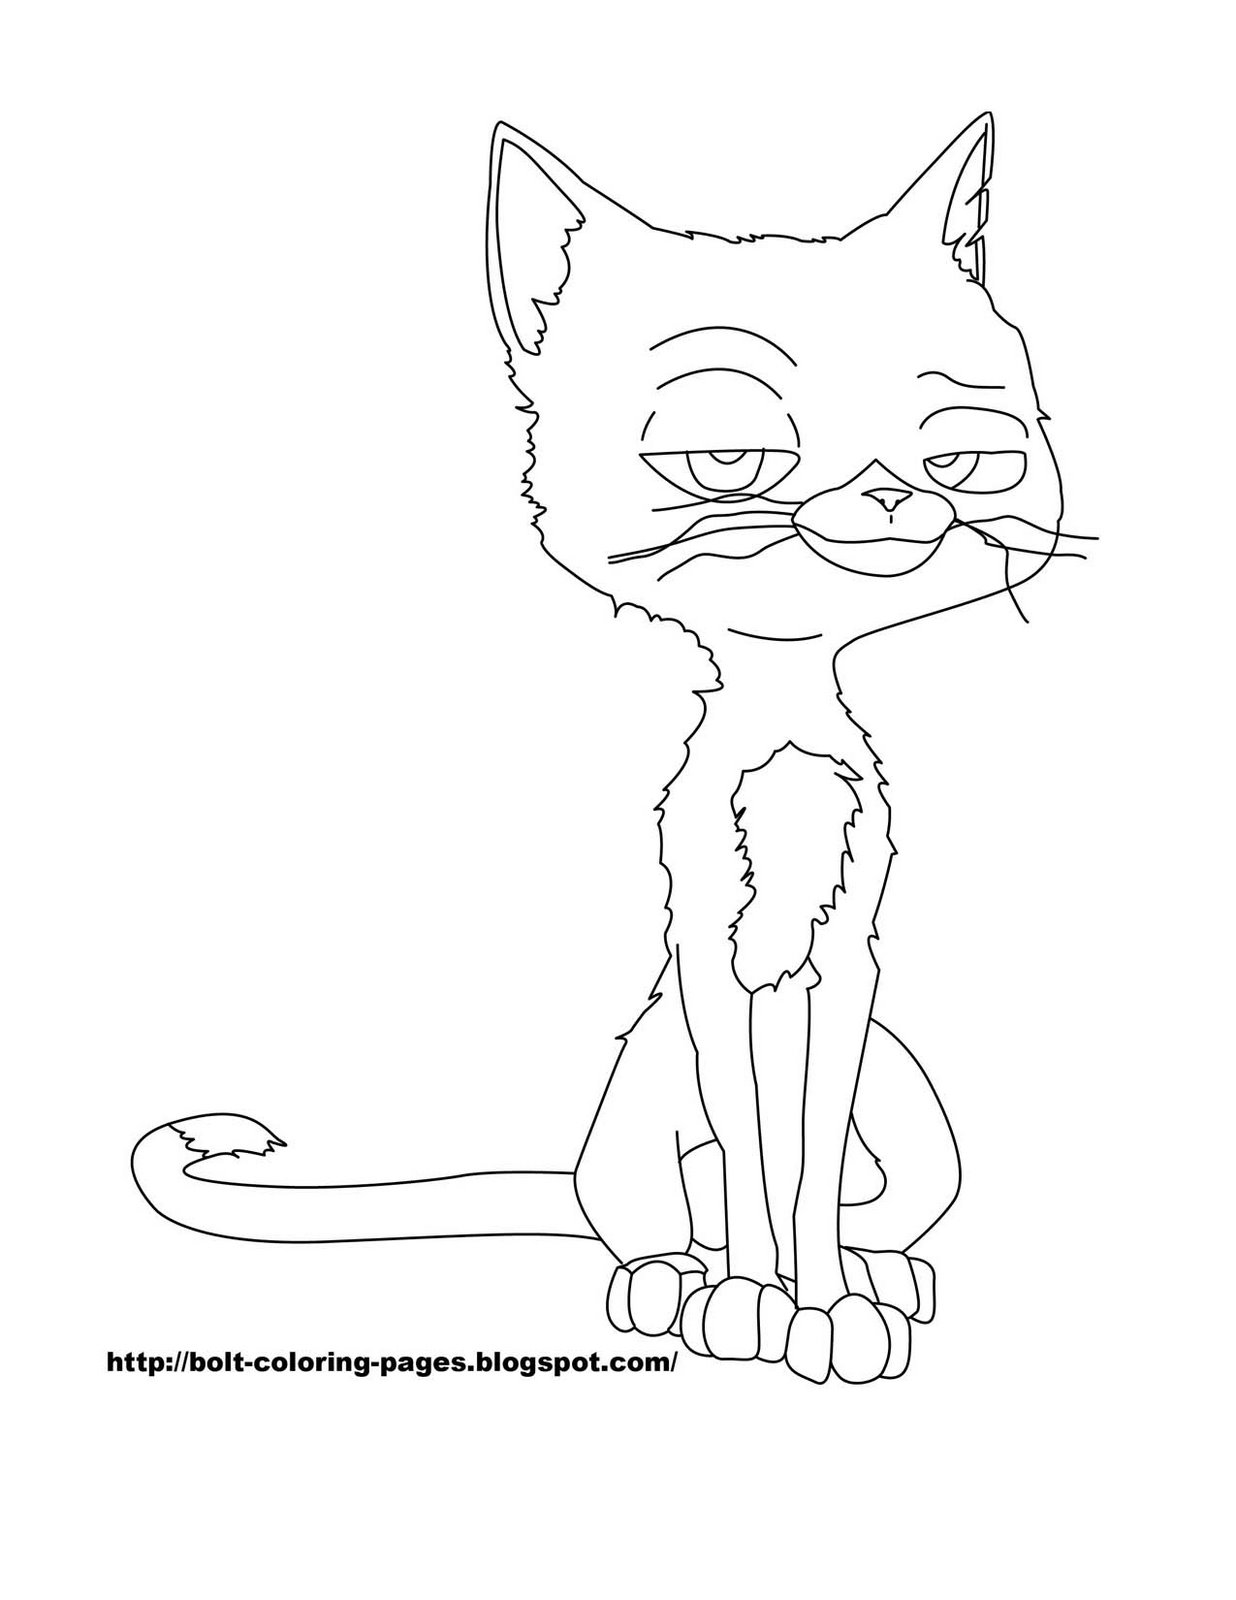 [bolt-coloring-pages-mittens-023.jpg]